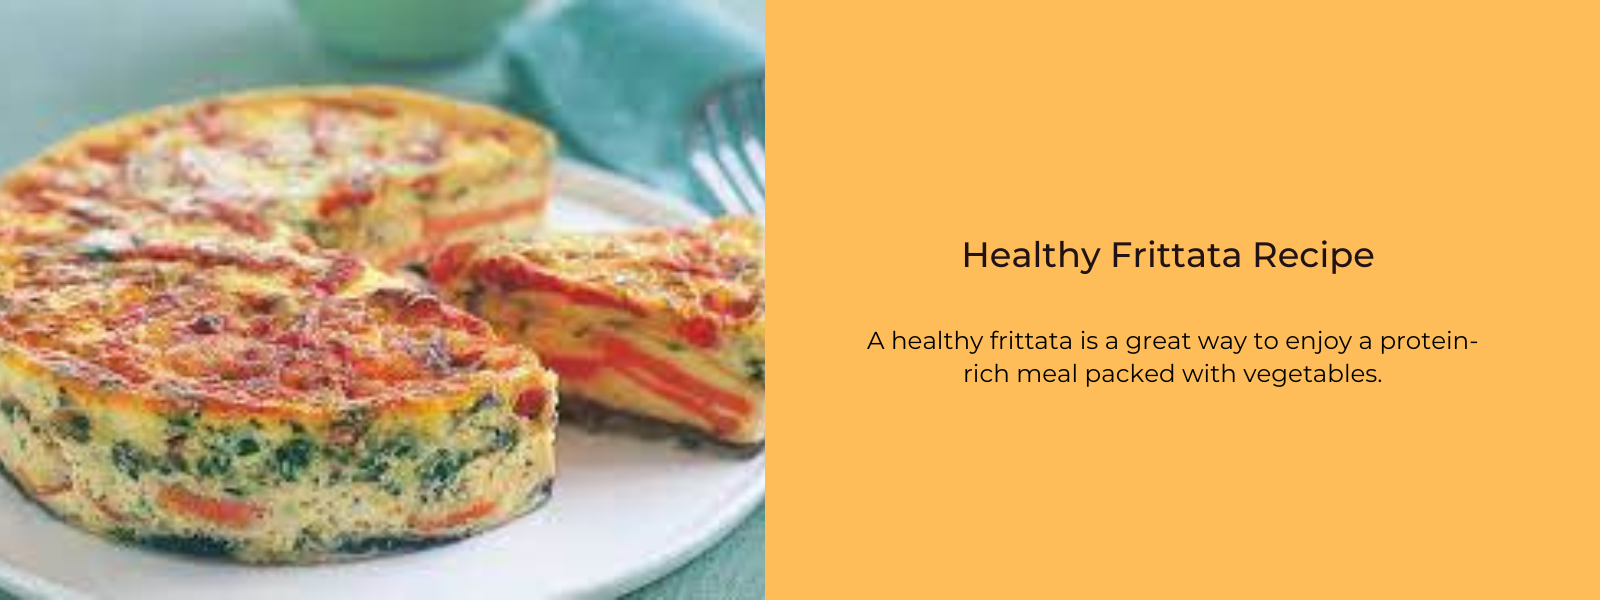 Healthy Frittata Recipe - Easy and Delicious Meal Option